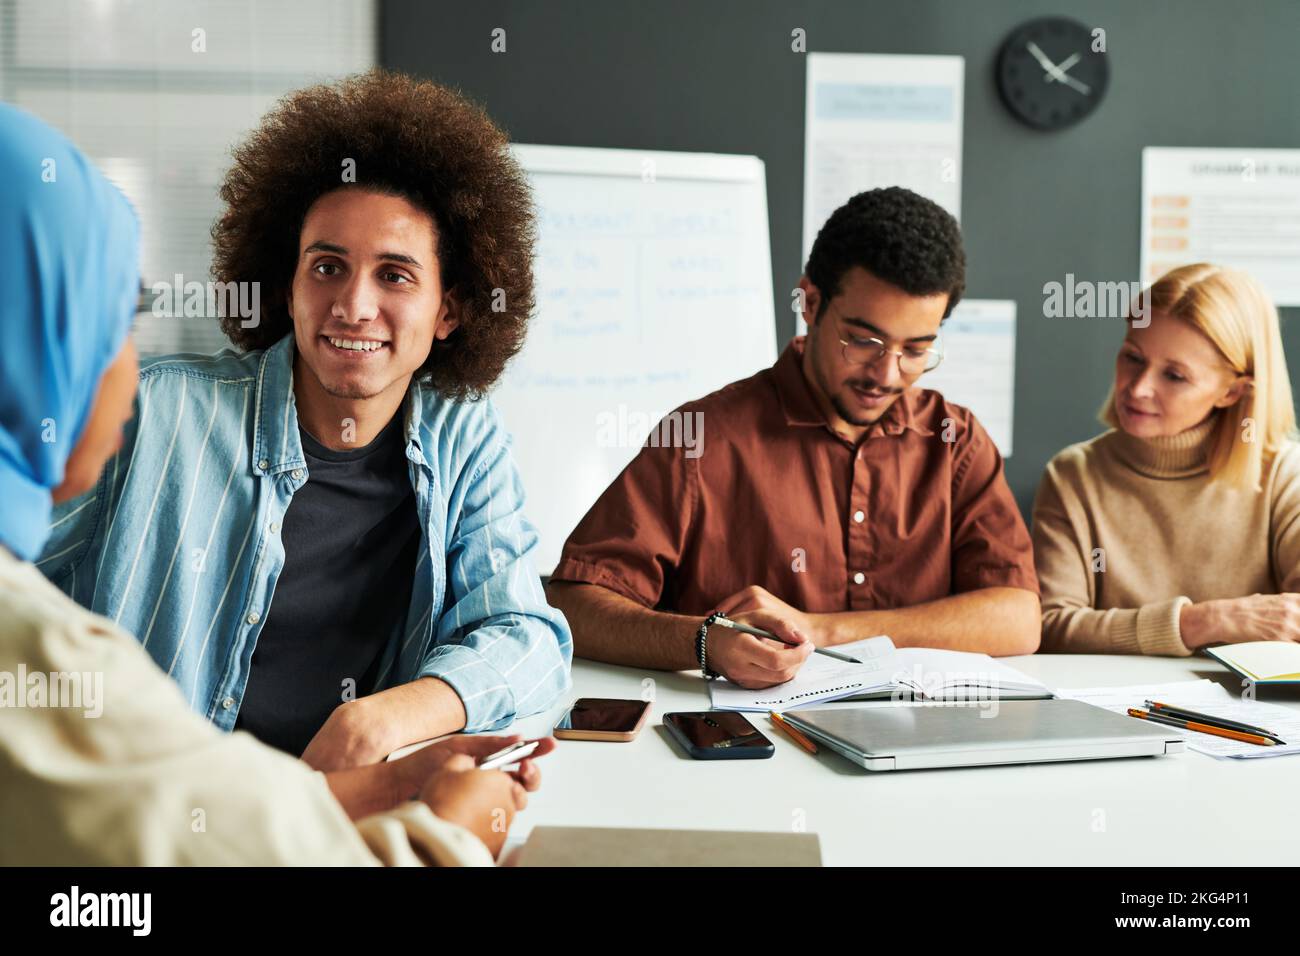 Happy young man with thick dark hair looking at Muslim female colleague in blue hijab during conversation by workplace Stock Photo